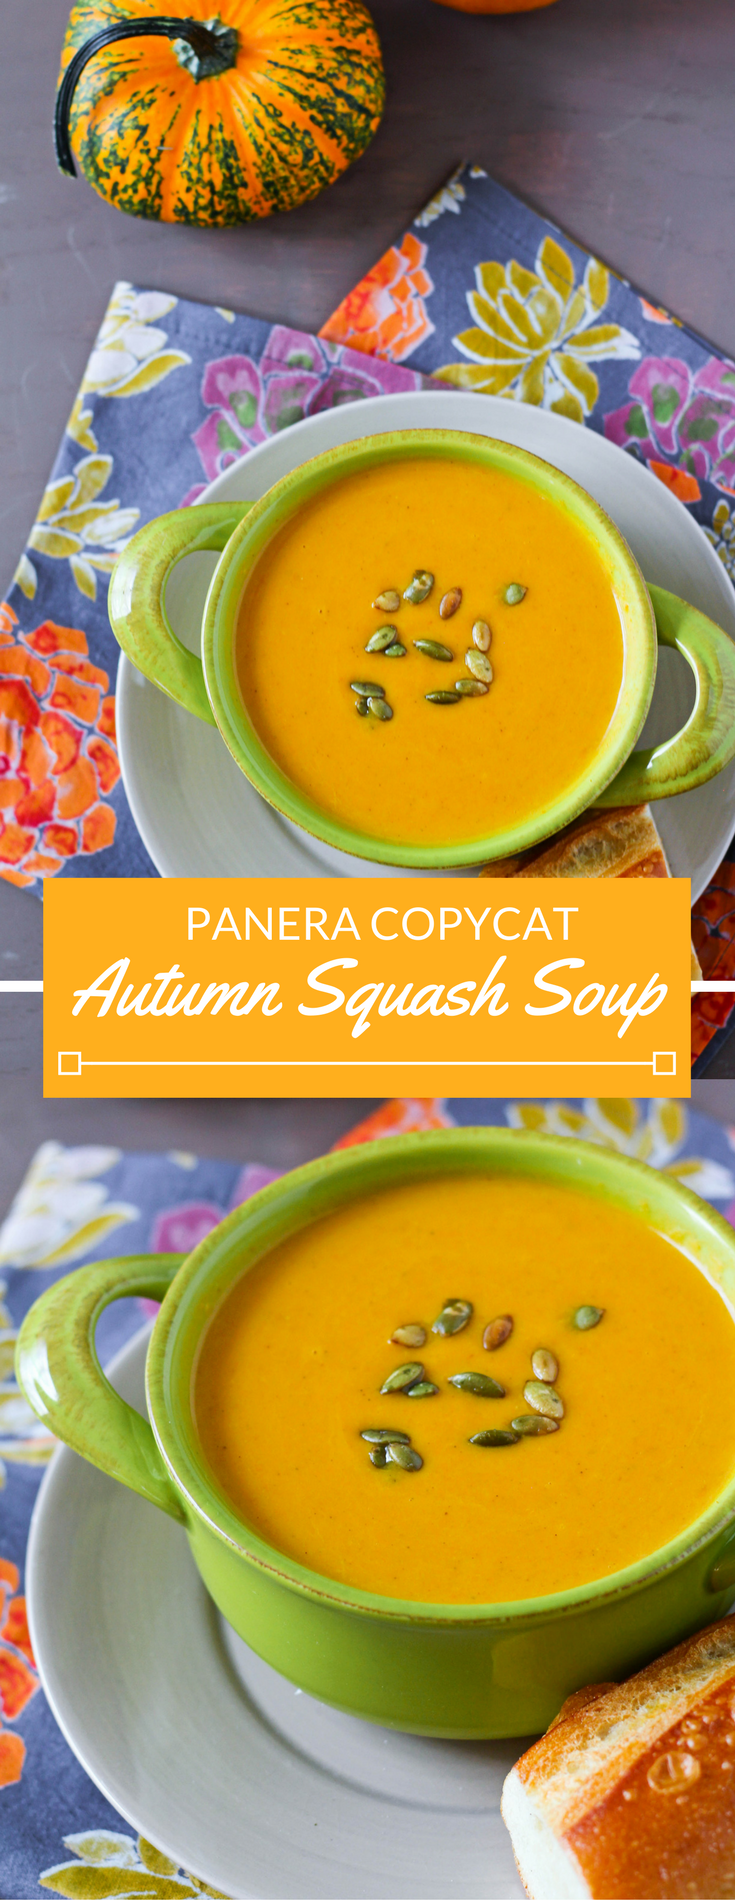 This Autumn Squash Soup is a copycat recipe of Panera's delicious Fall inspired soup. Made with pumpkin puree, lots of herbs and spices, and a creamy both, this Autumn Squash Soup is warming and filling. 